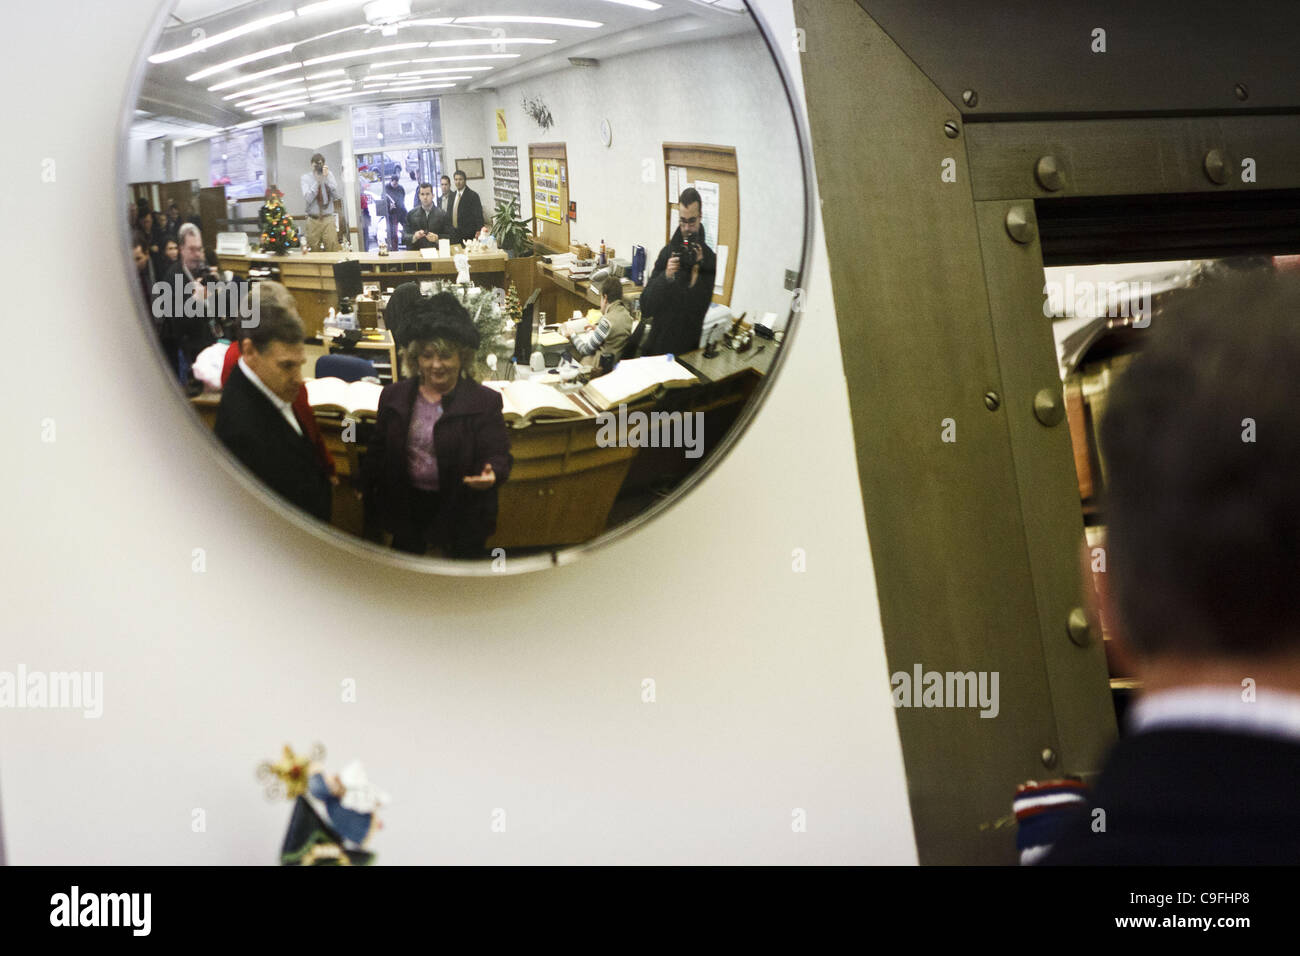 Dec. 14, 2011 - Harlan, Iowa, U.S. - Republican presidential candidate Texas Gov. Rick Perry is reflected in a mirror as he talks with small business owner Randy Ouren and Dawn Cundiff of the Shelby County Chamber of Commerce in an old bank vault used to maintain property titles and records as he ca Stock Photo